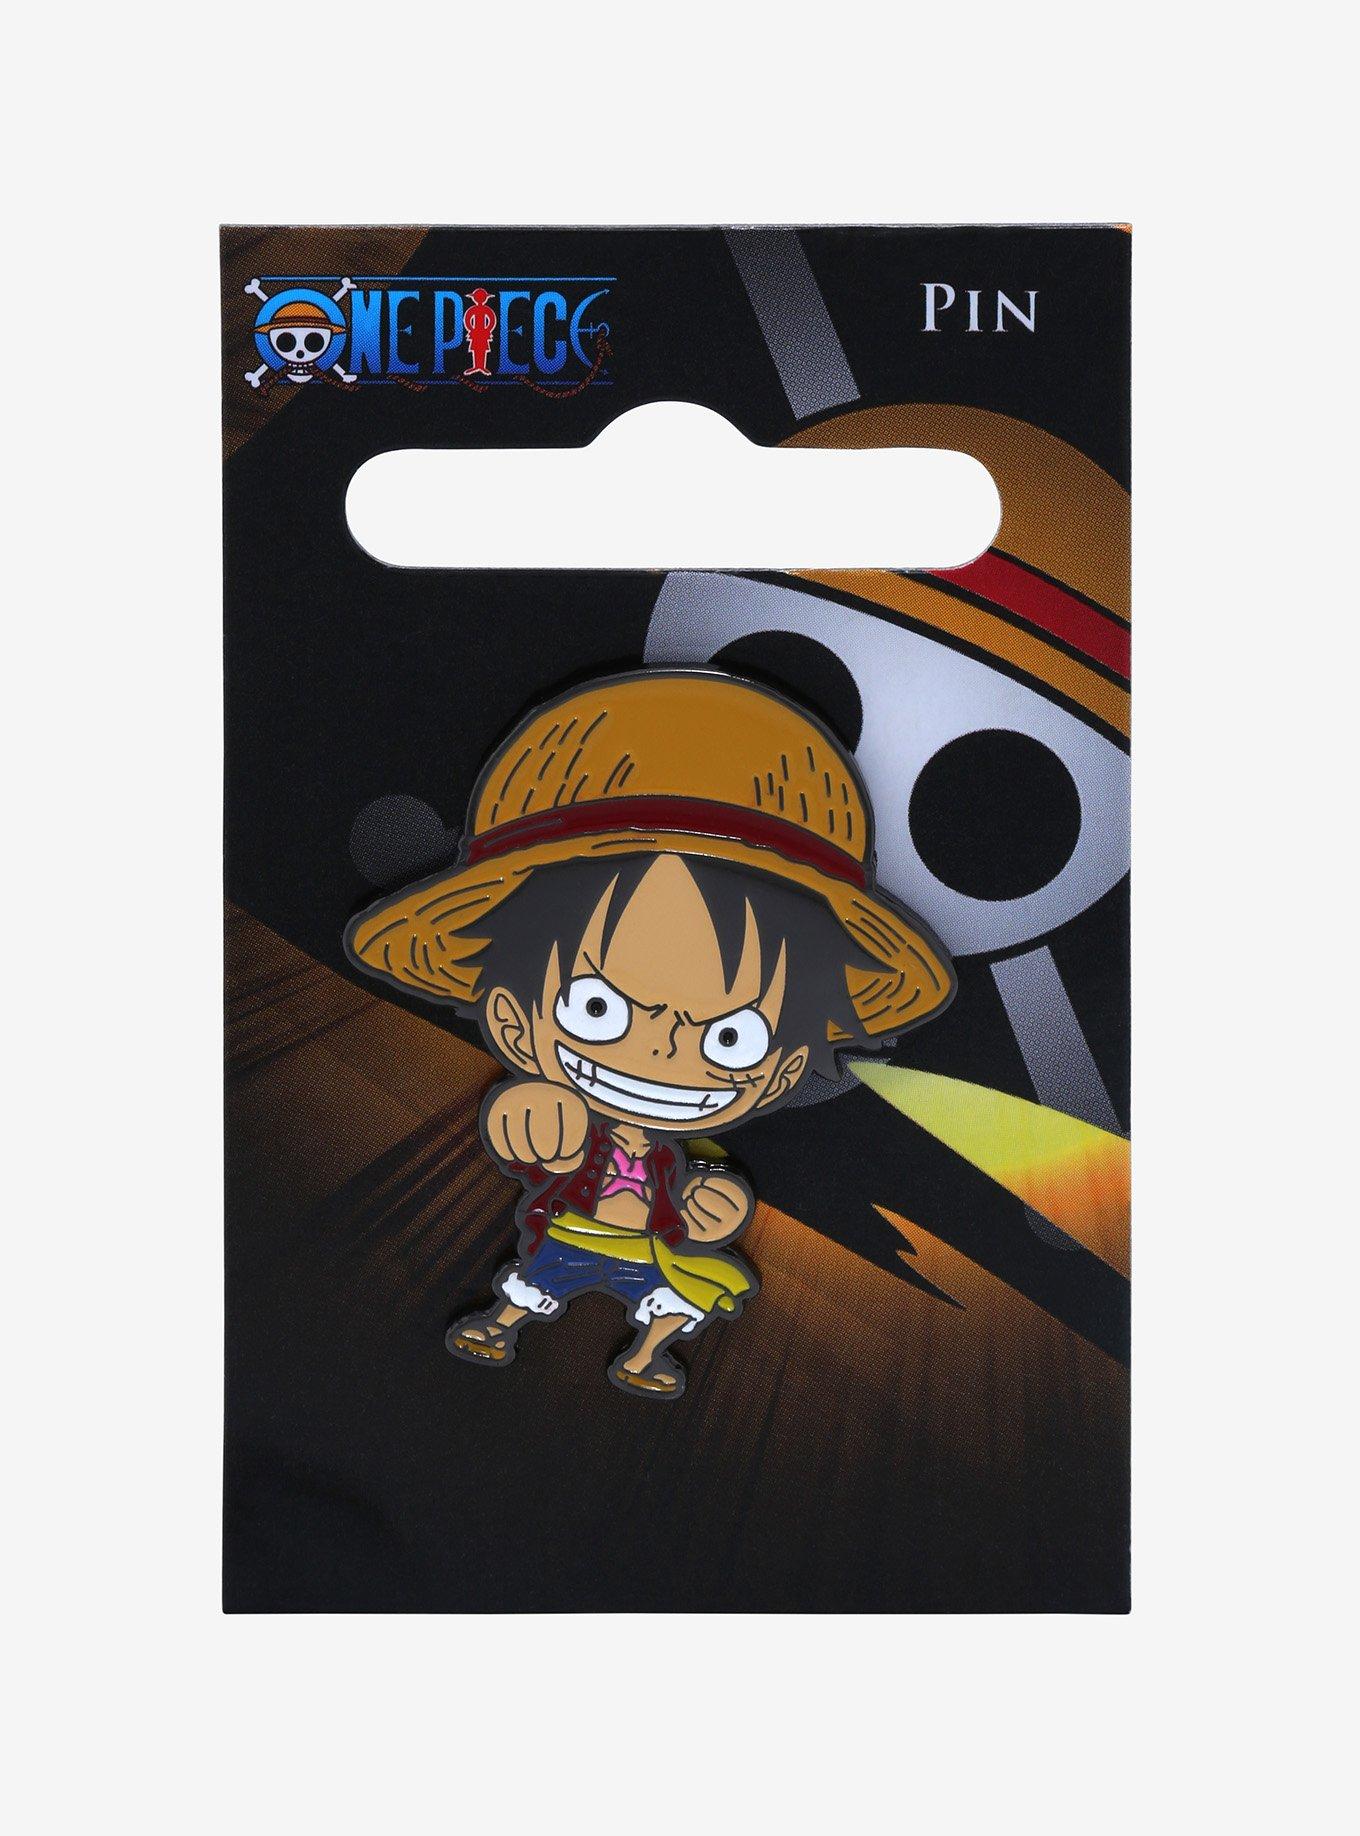 One Piece Monkey D Luffy Enamel Pin Funny King Of Pirates Brooch